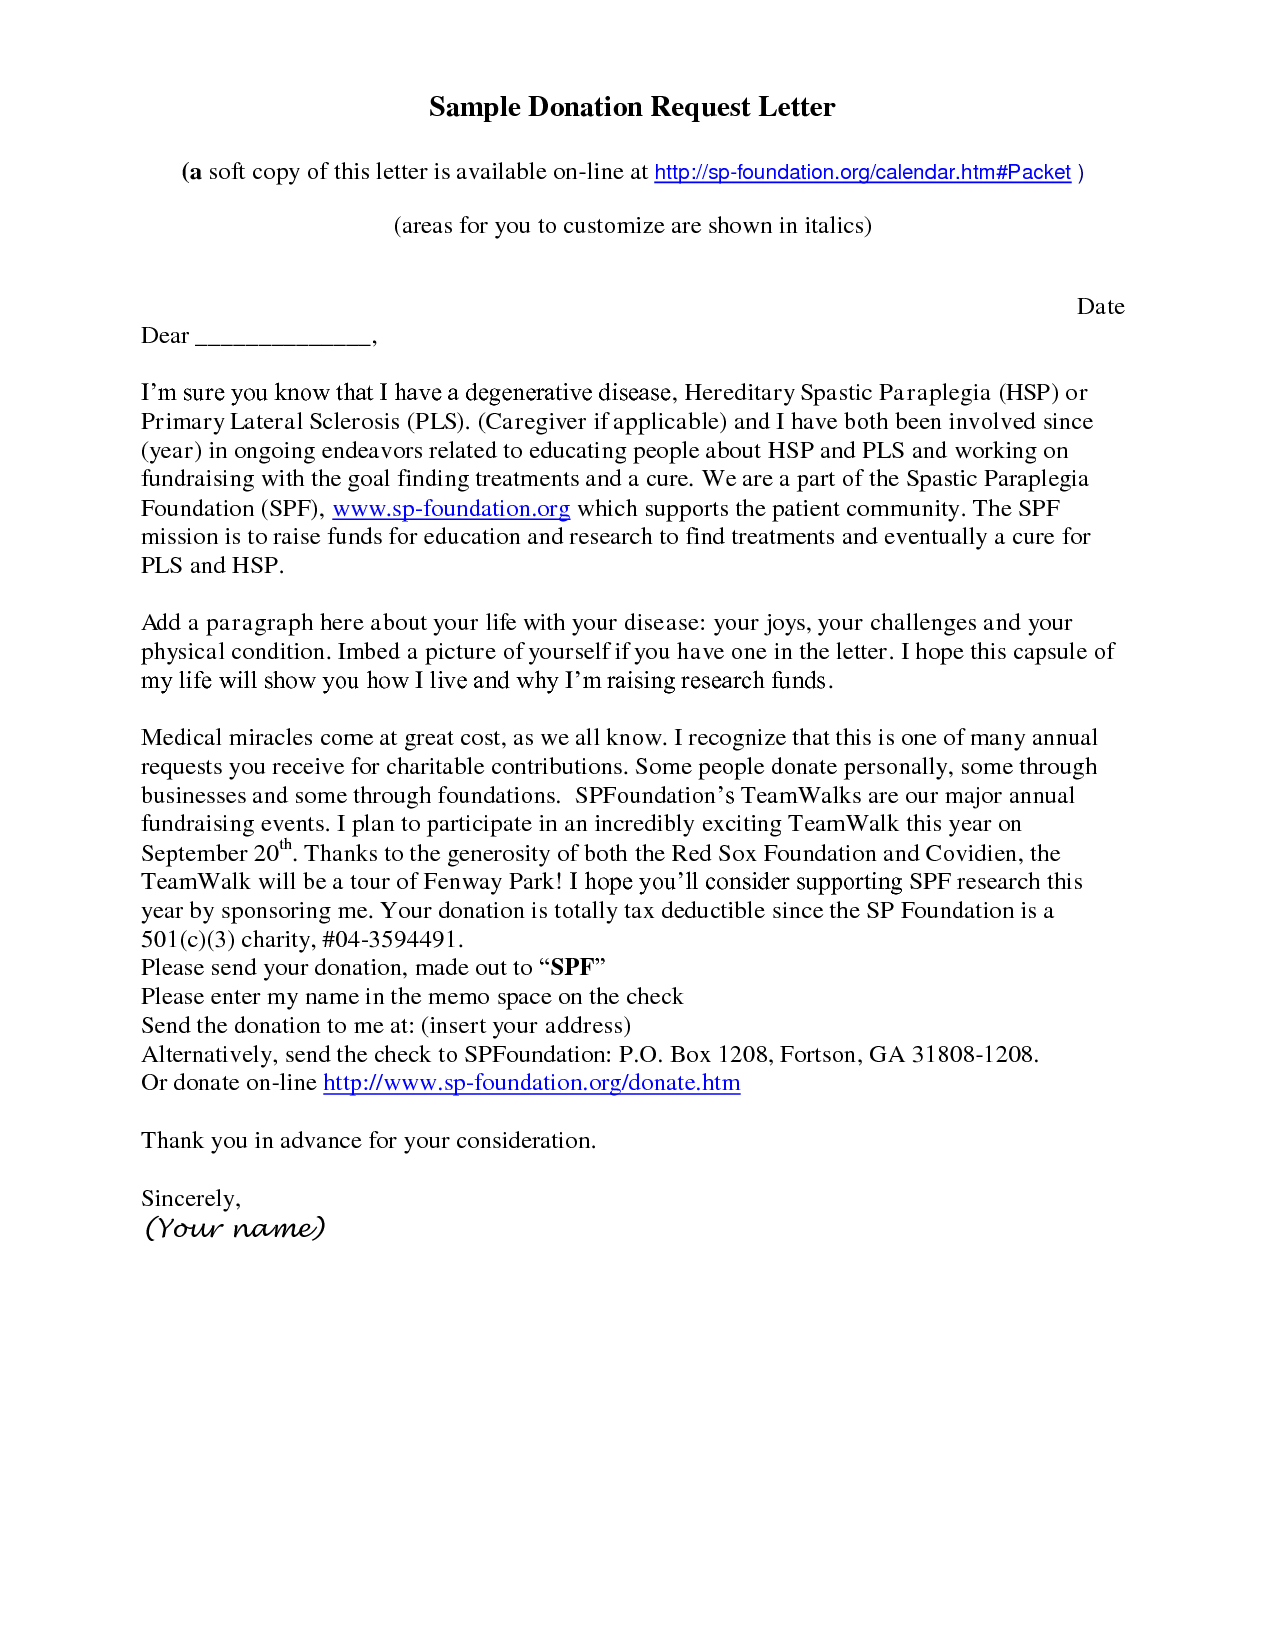 Sponsorship Letter Template for Donations - How to Write A solicitation Letter for Donations Choice Image